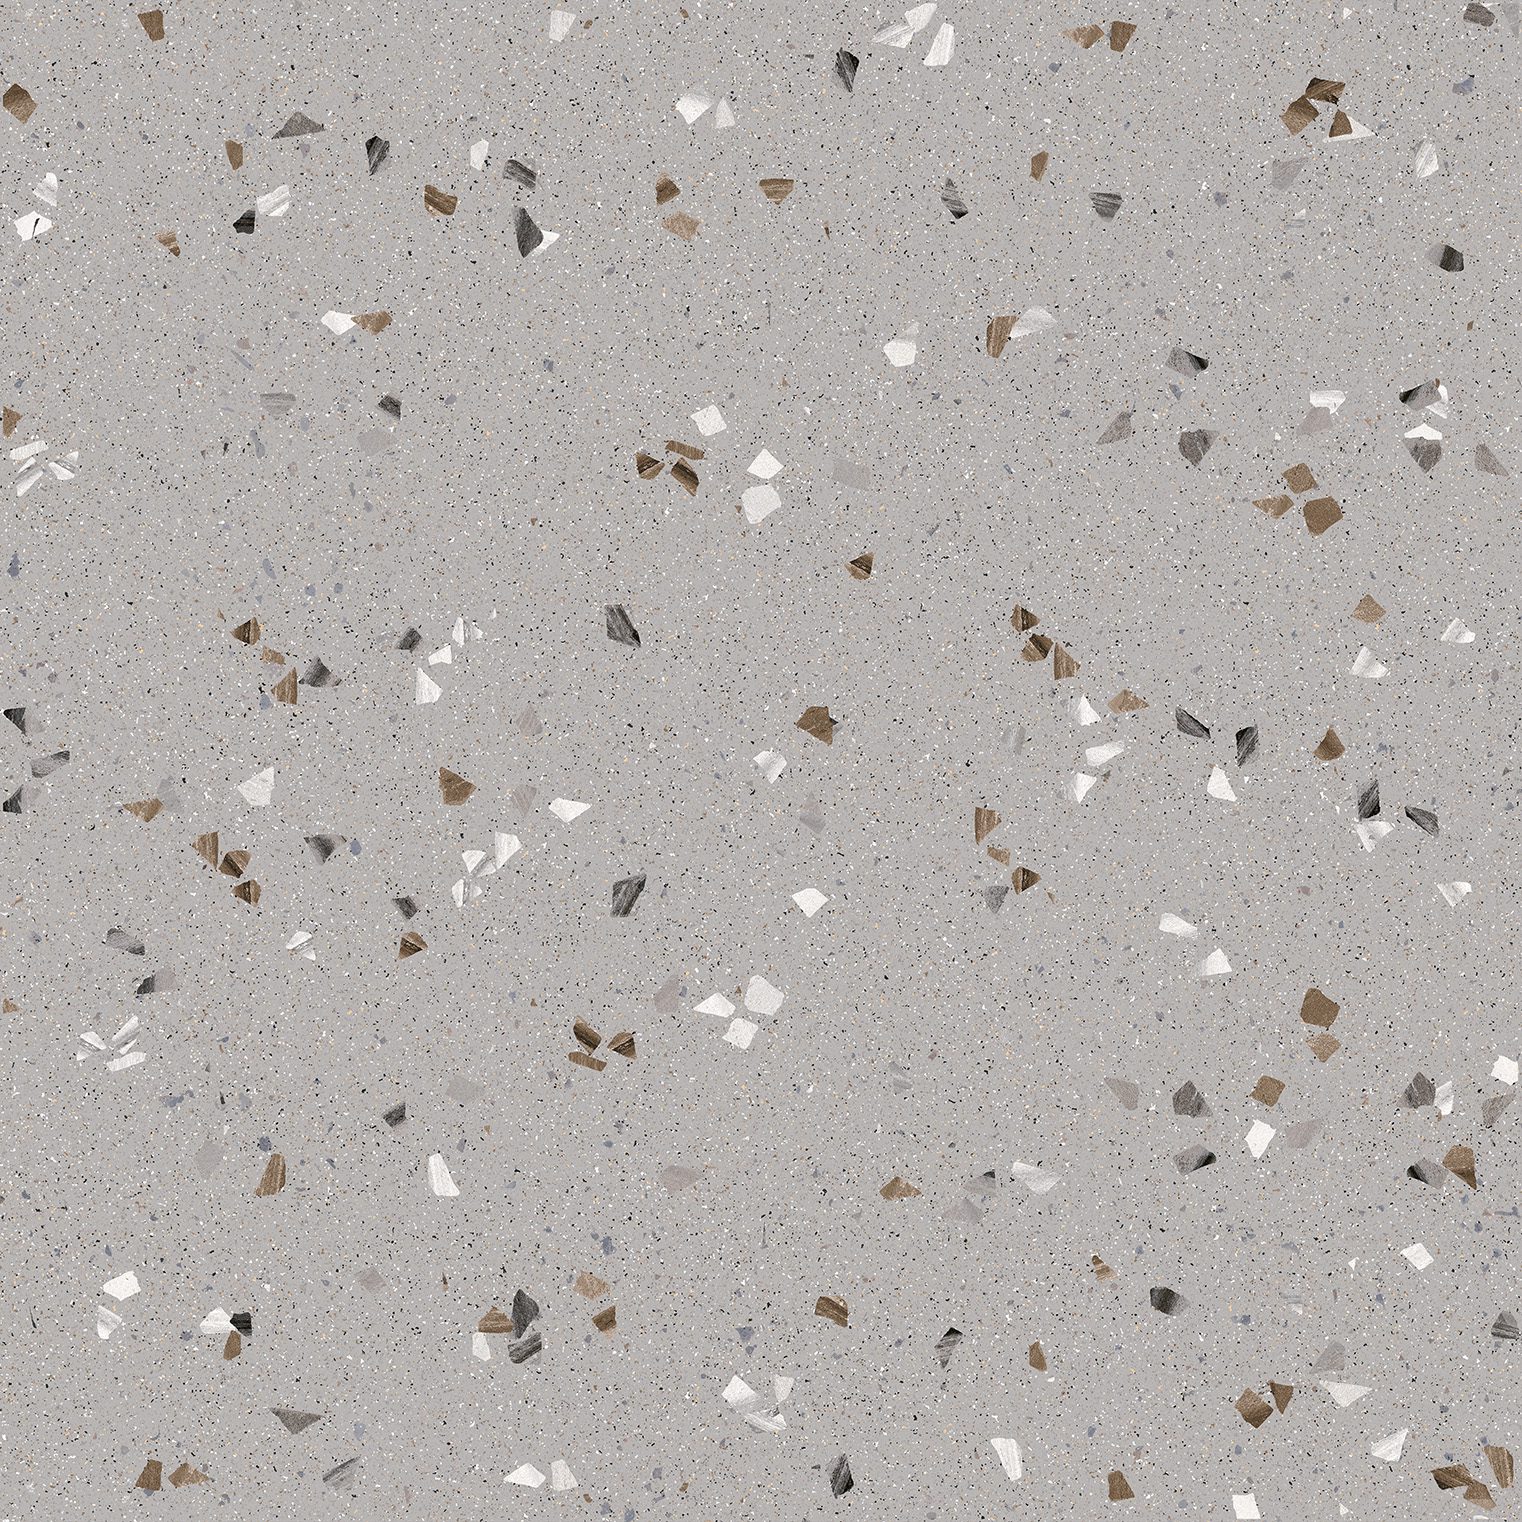 Gray granite or salt and pepper stone background